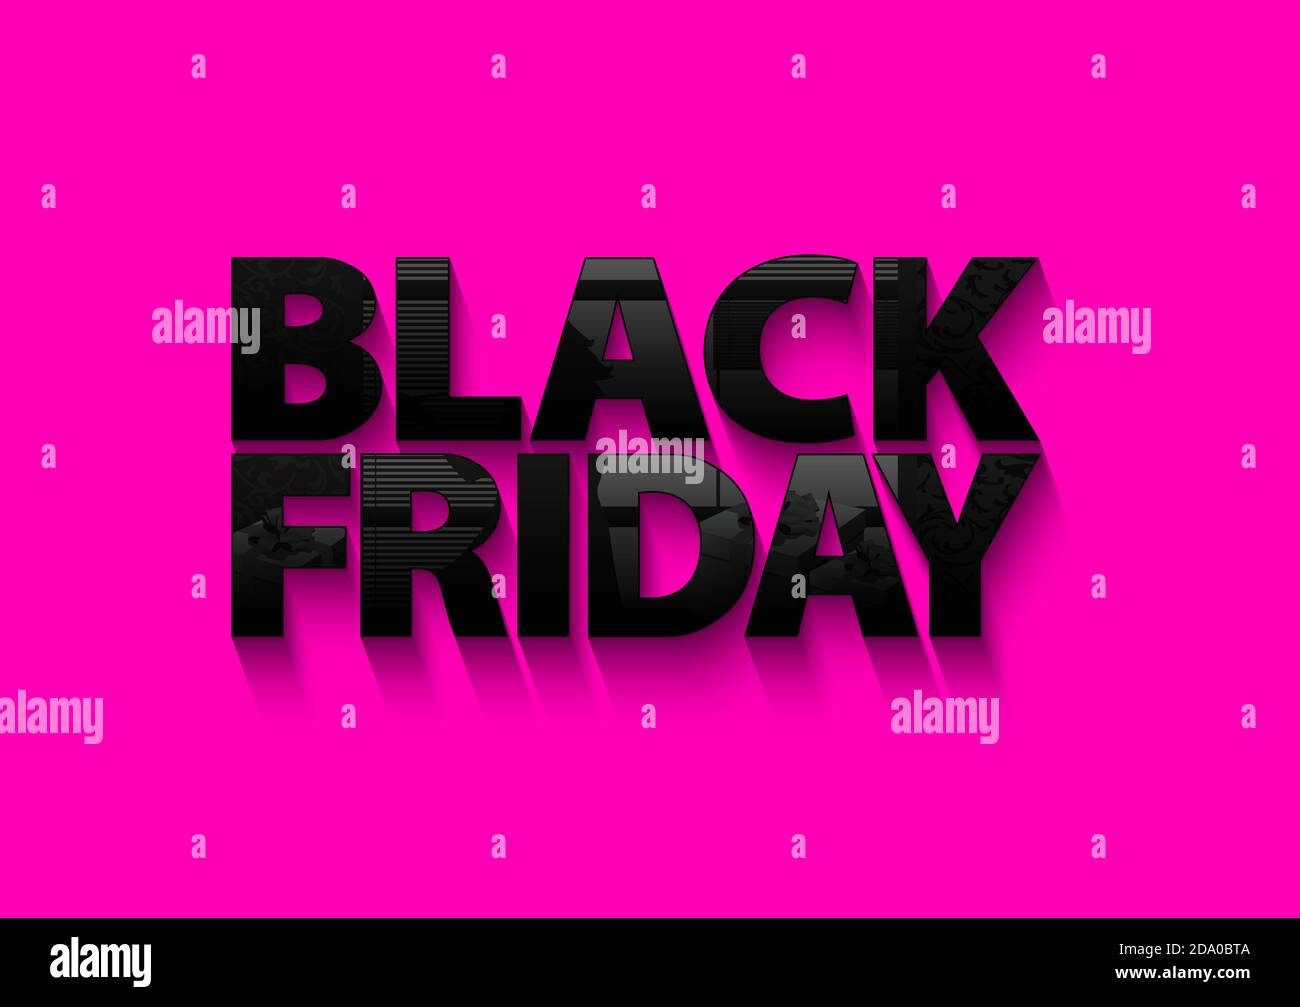 Black Friday vector text on pink background. Window and gift glass effect reflection on glossy black letters. Glamorous colors for bright sale banner Stock Vector